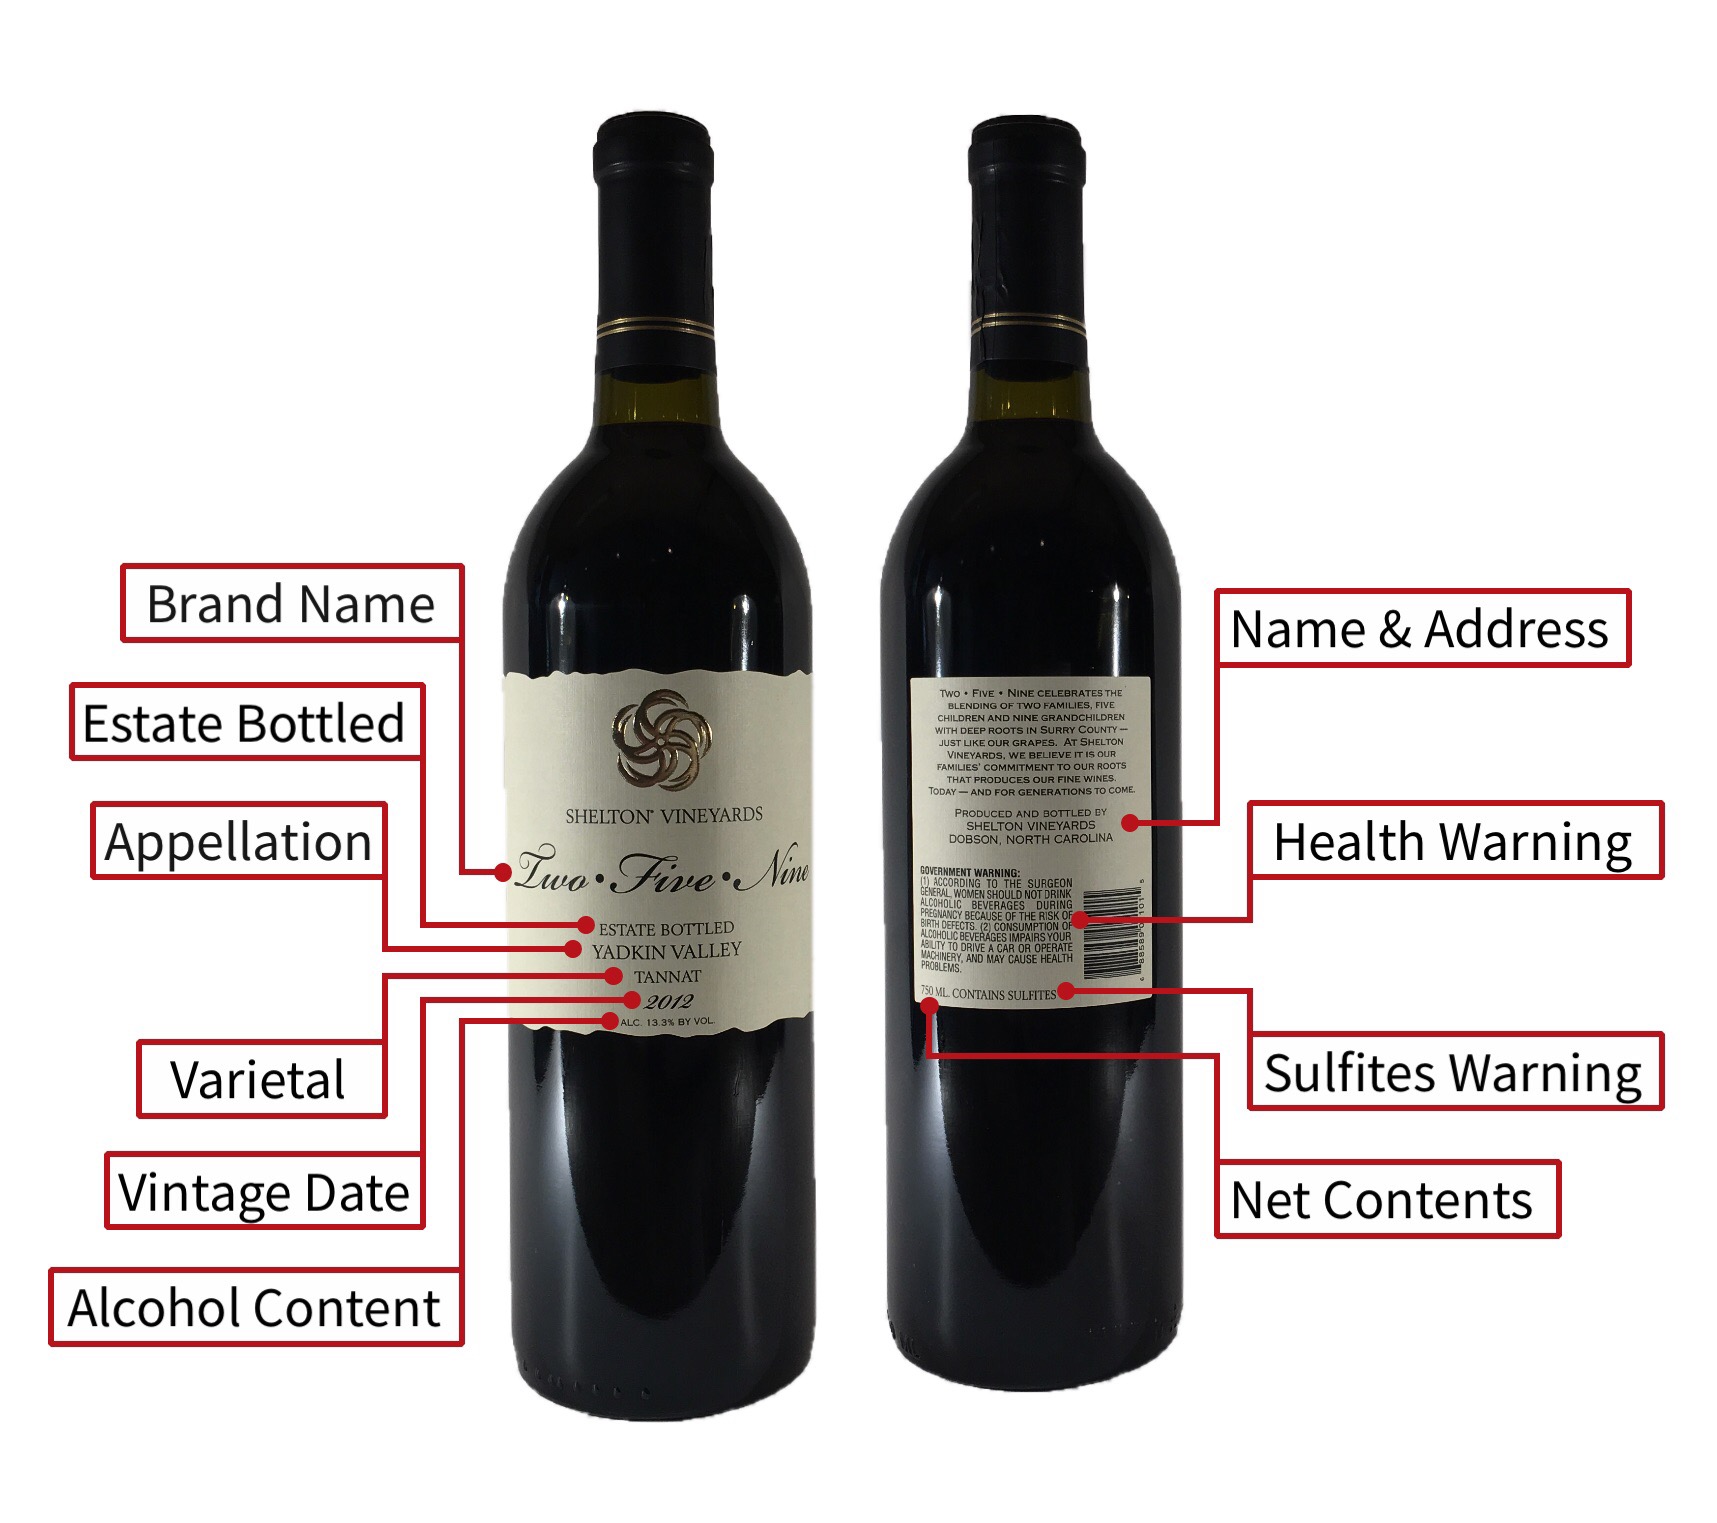 How to Read a Wine Bottle Label